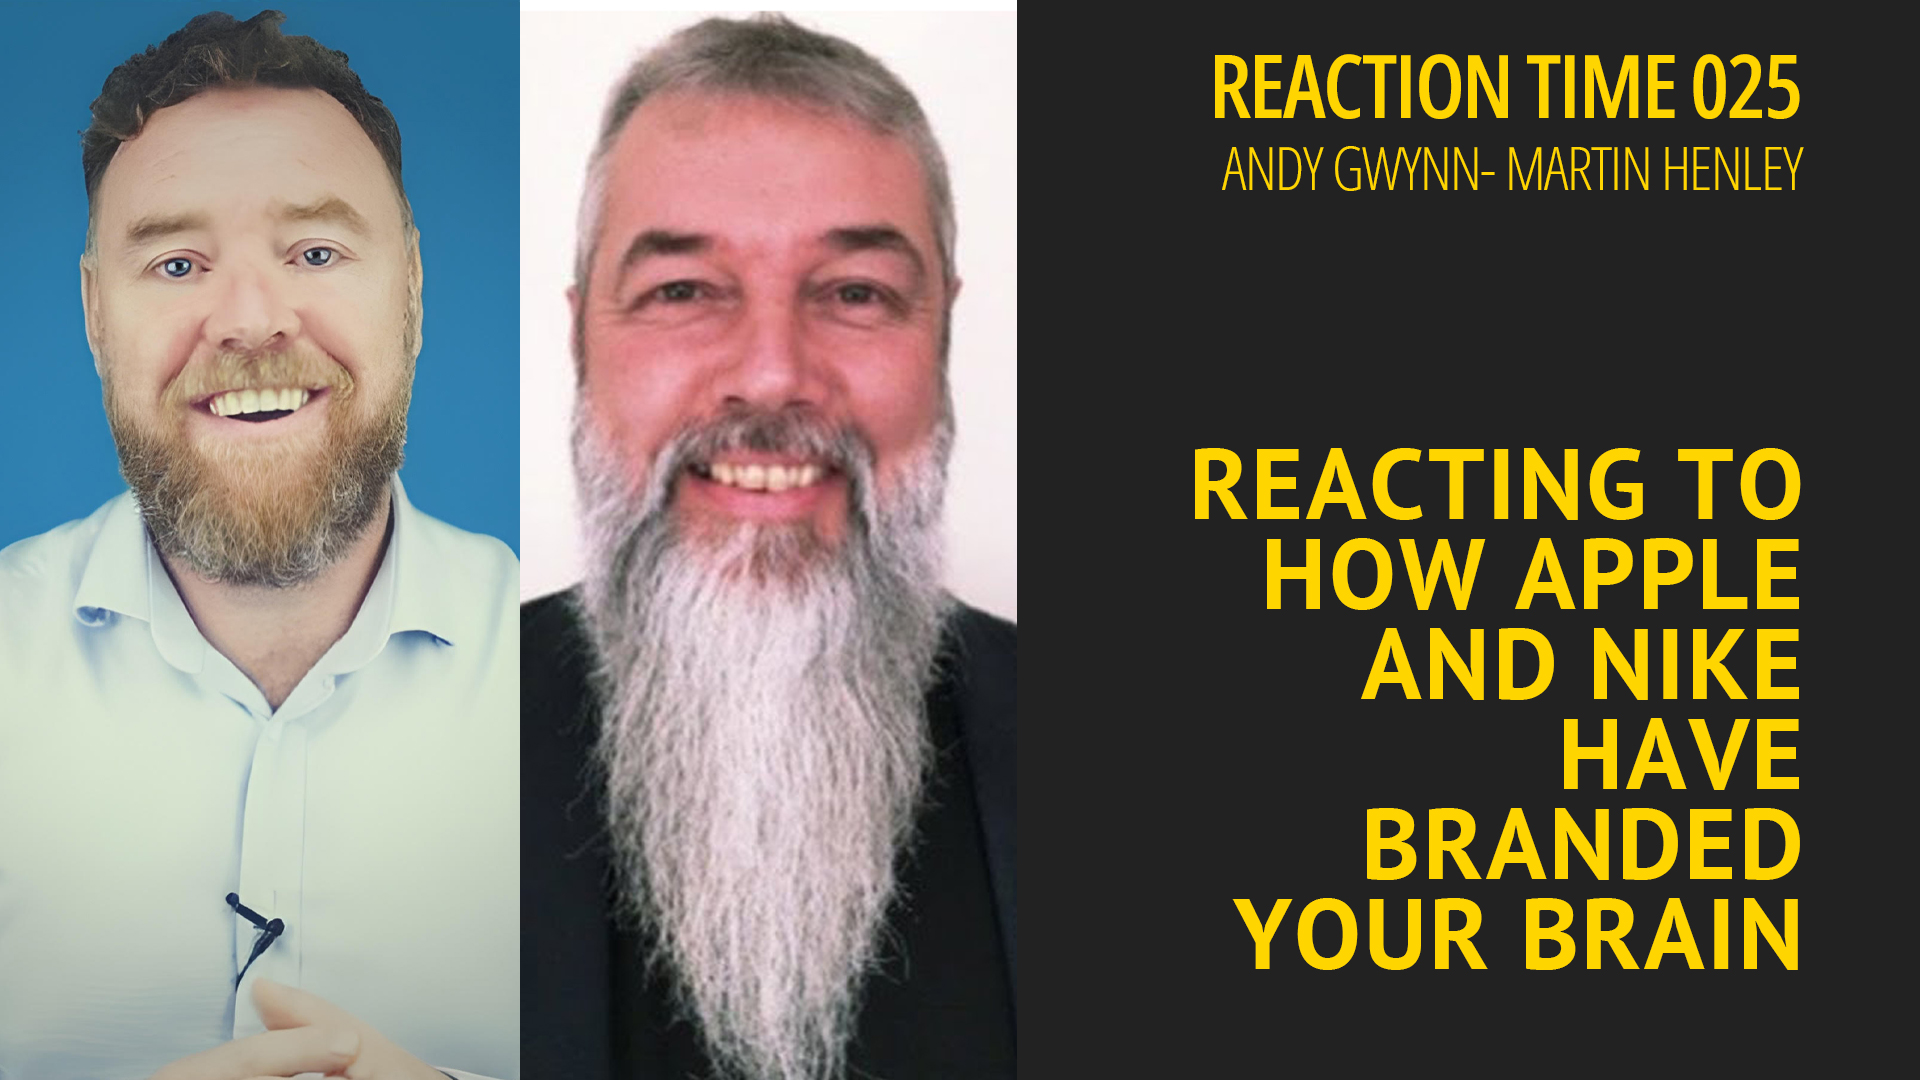 Reacting to How Apple and Nike have branded your brain – Reaction Time 025